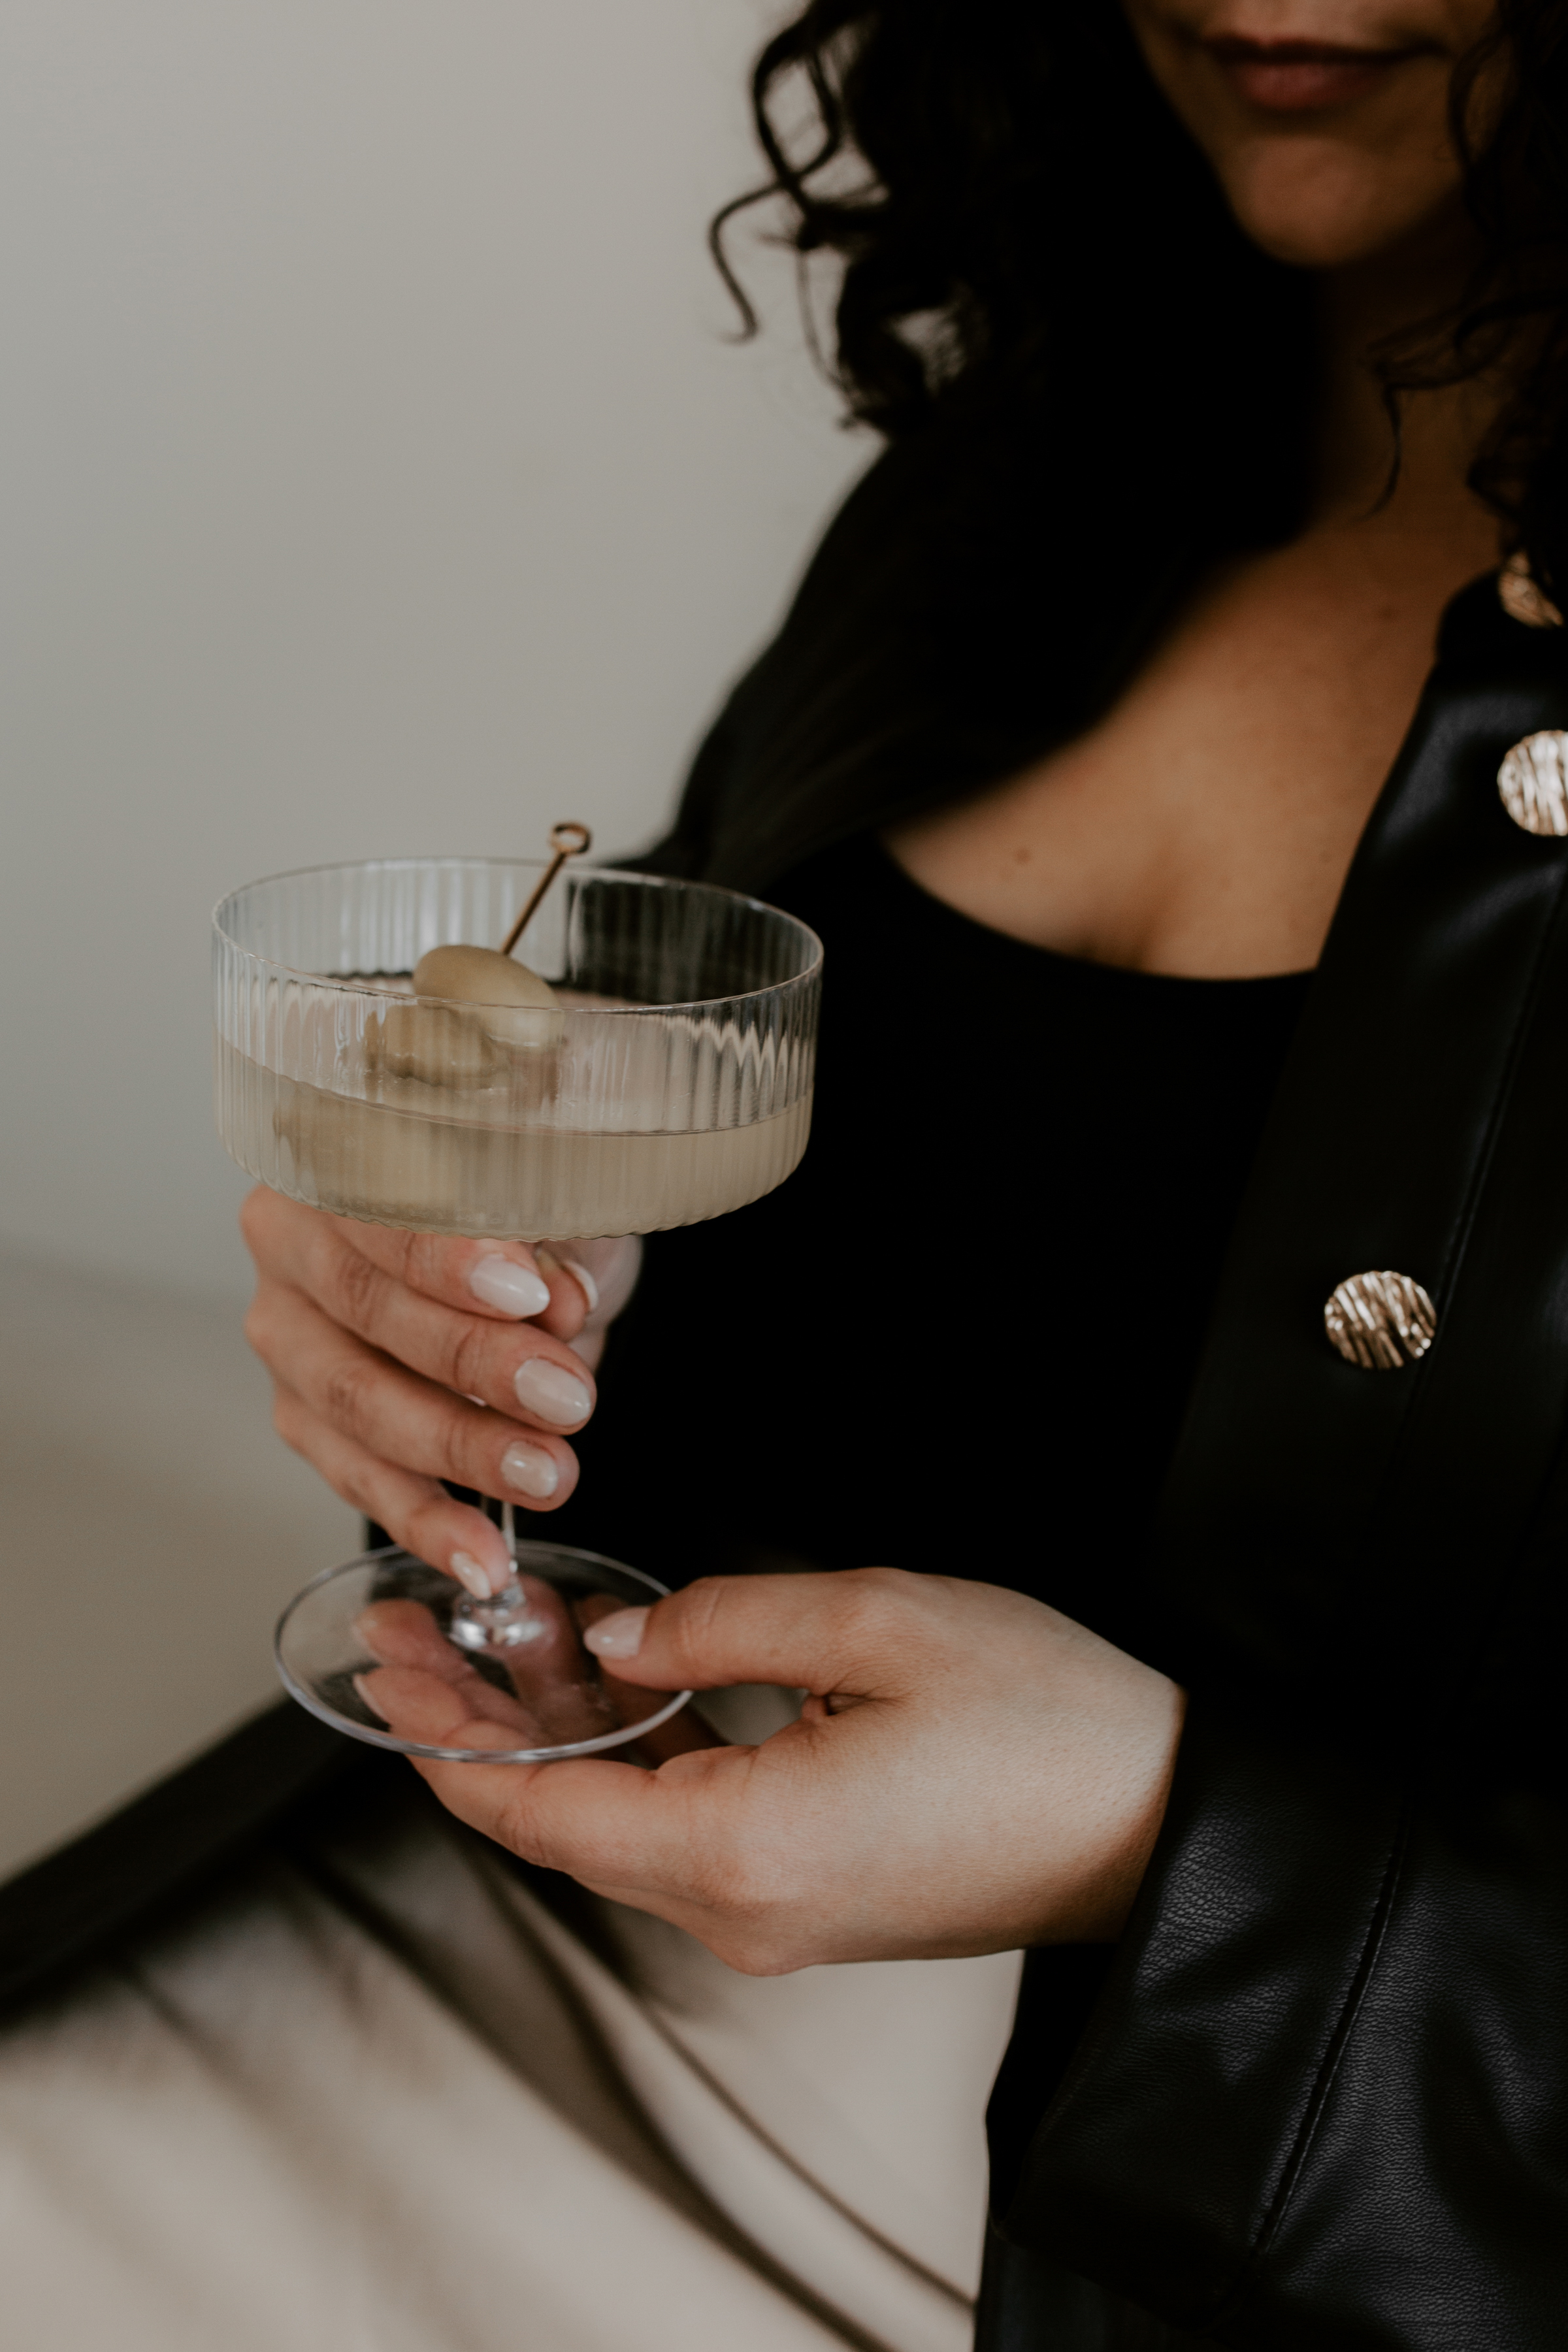 Minimal stock photo of woman dressed in black holding a martini glass